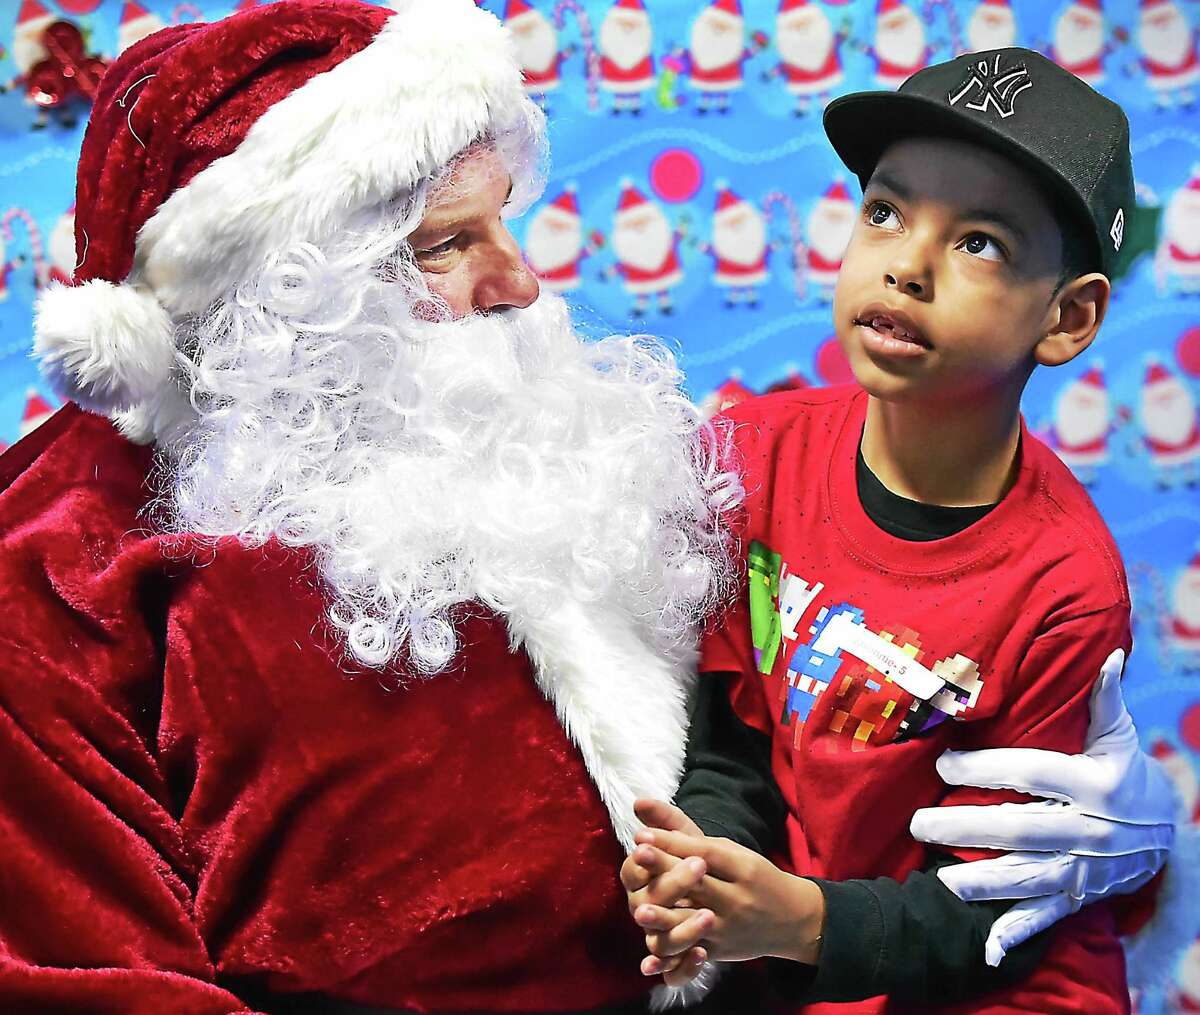 (Catherine Avalone - New Haven Register) Javonnie Rodriguez, 7, of West Haven sits on the lap of a "sensitive" Santa who meets with children on the autisim spectrum one on one in a low-stimuli setting at a holiday party, Saturday, December 19, 2015, at ASD Fitness at 307 Racebrook Road in Orange.